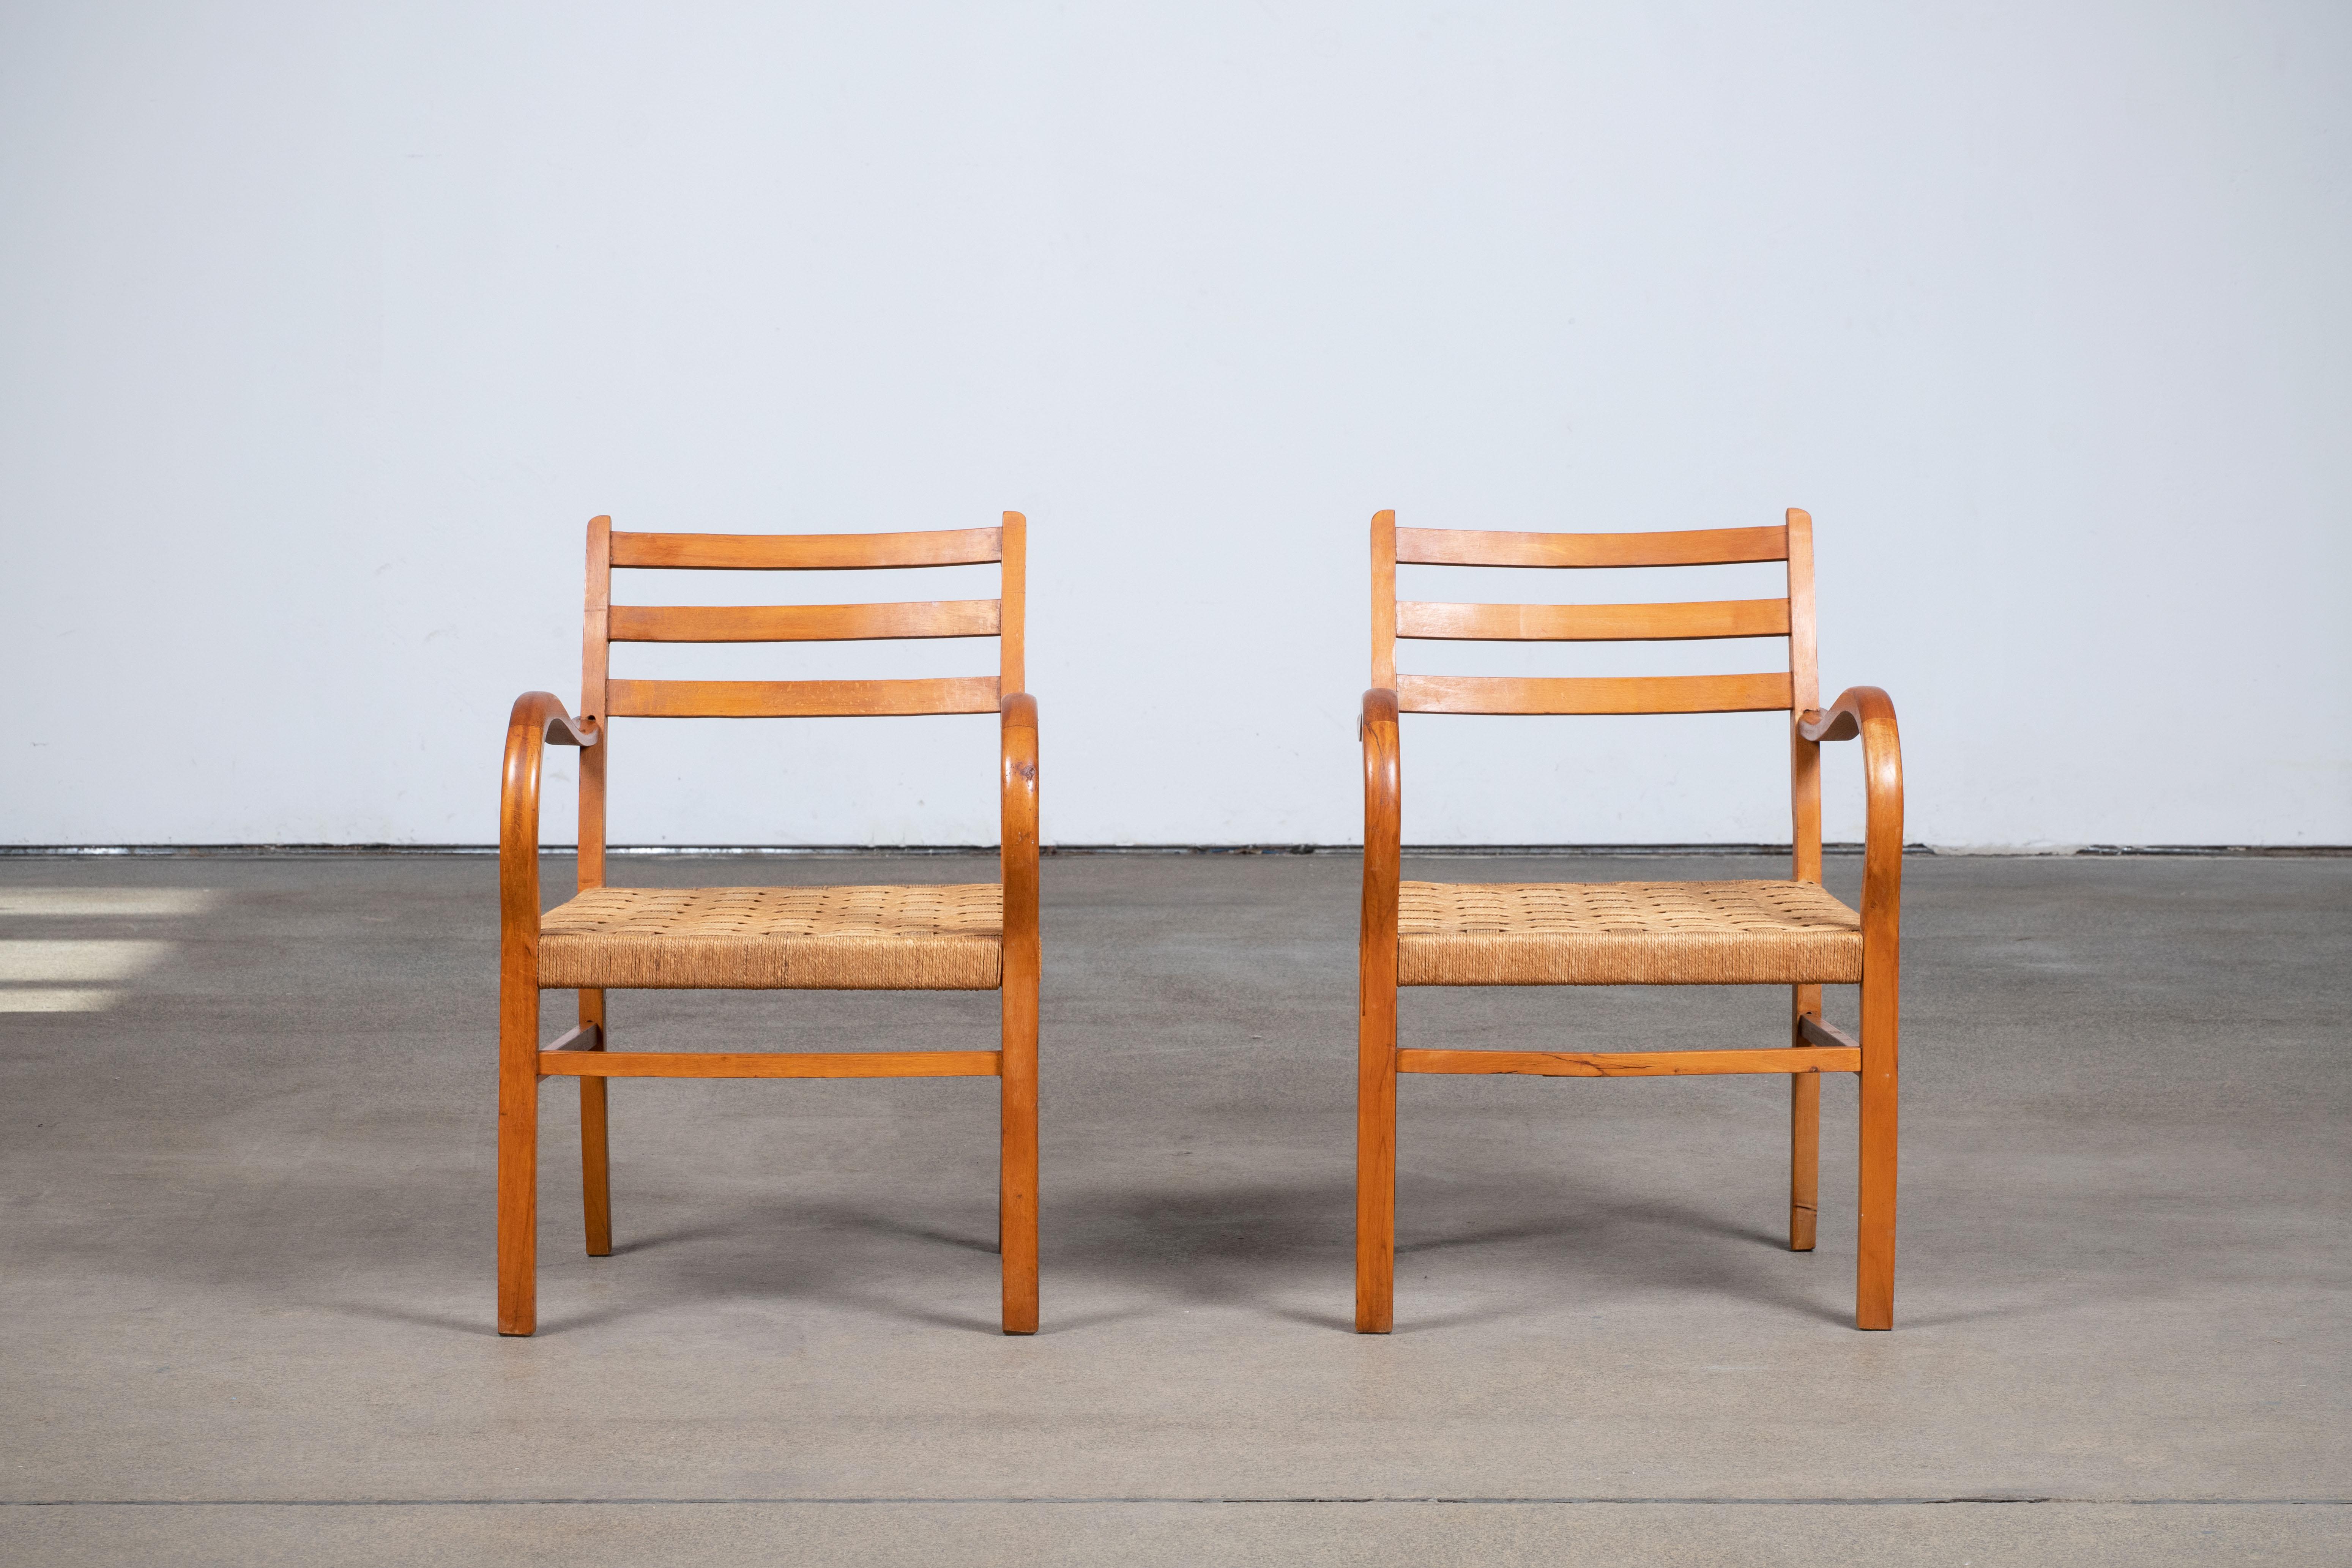 A pair of Bauhaus armchairs by Erich Dieckmann, 1925.
Together with Marcel Breuer, he is considered the most important Bauhaus furniture designer. He mainly developed furniture, initially in wood of basic geometric shape with rectangular frames and